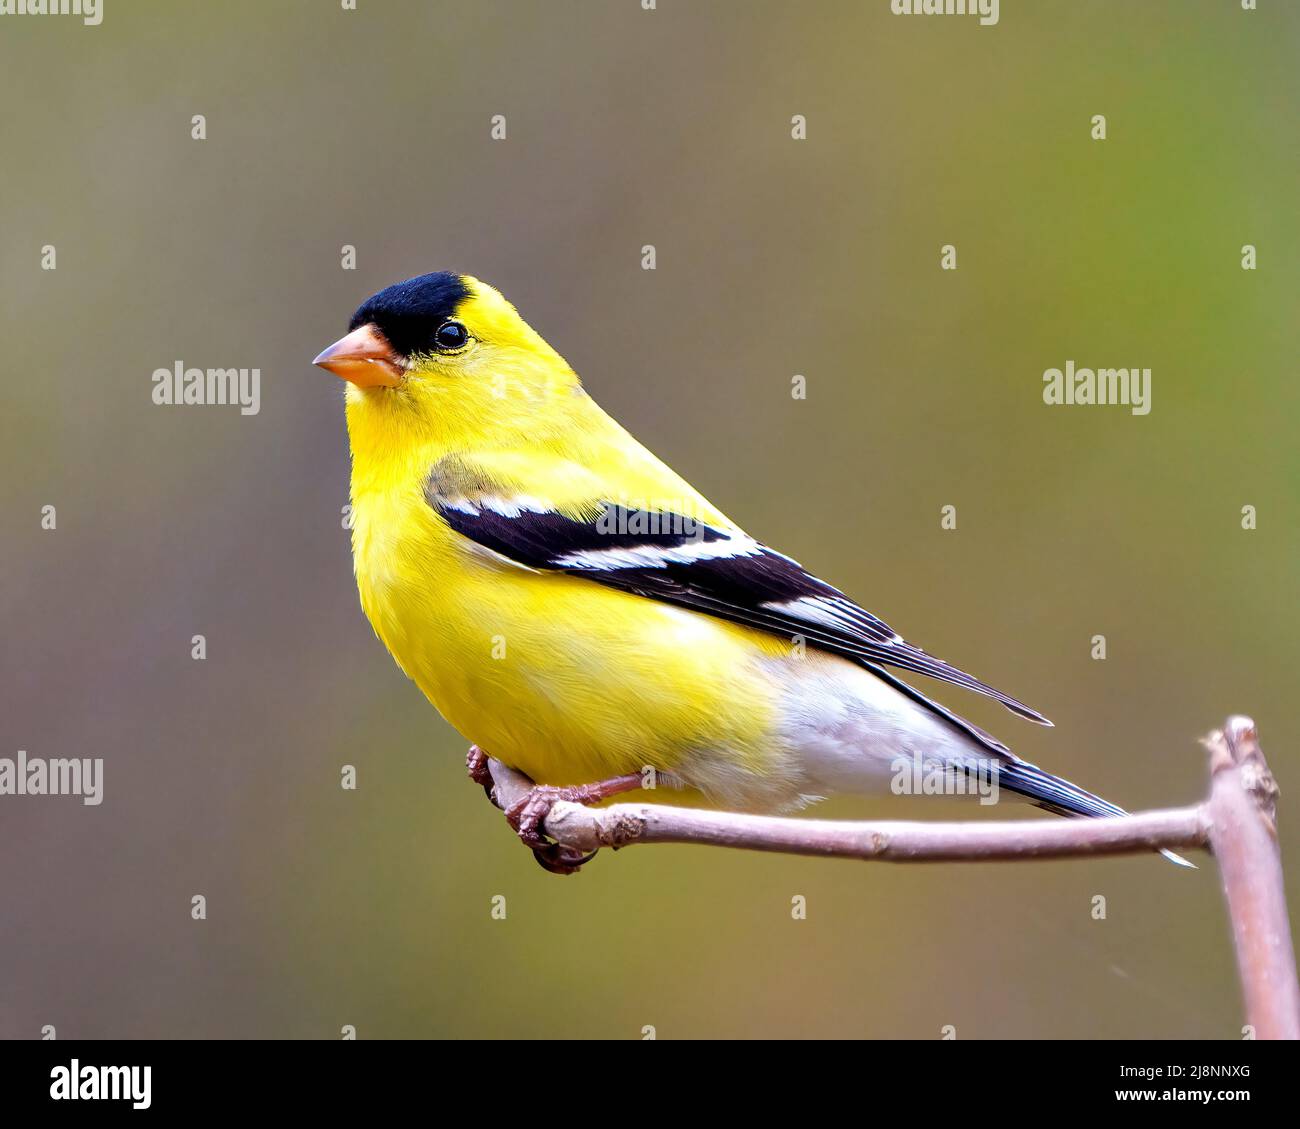 American Goldfinch close-up side view, perched on a twig with a soft blur background in its environment and habitat displaying yellow feather colour. Stock Photo